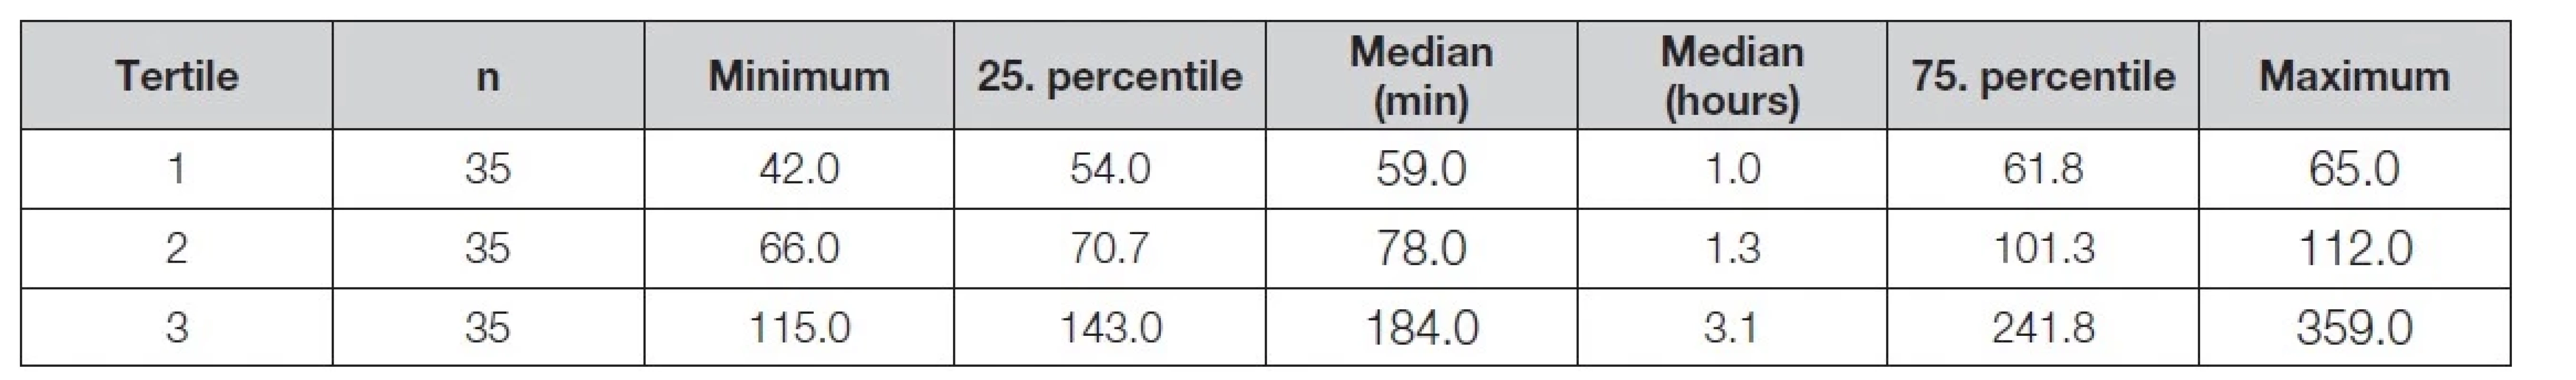 Tertiles of the time interval (in minutes, except for column Median in hours) between the first and the second sample for
hs-cTn measurements.